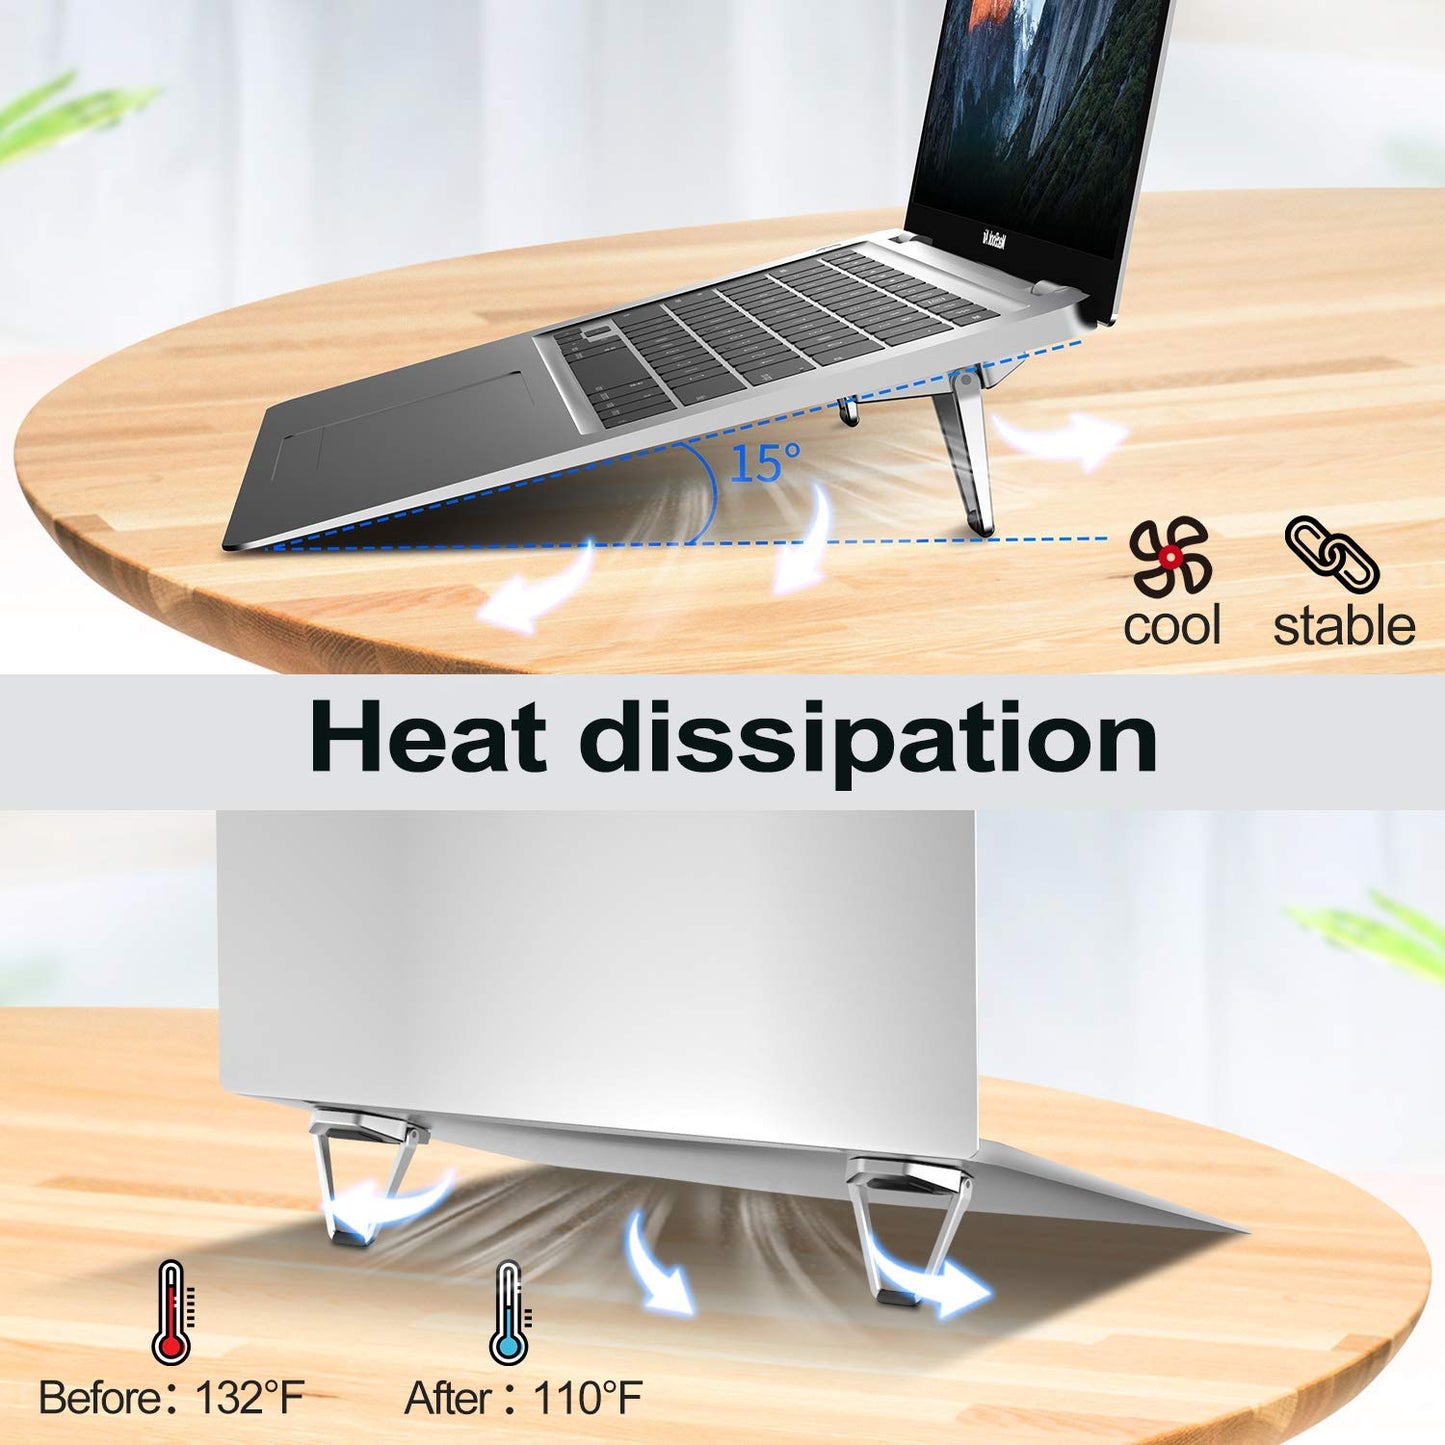 CEUTA Portable Invisible Laptop Stand-2PCS, Mini Aluminum Cooling Pad,Computer Keyboard Mount Kickstand,Ergonomic Lightweight Laptop Desk Stand for MacBook Pro/Air, Lenovo,12-17 Inches Tablet & Laptop